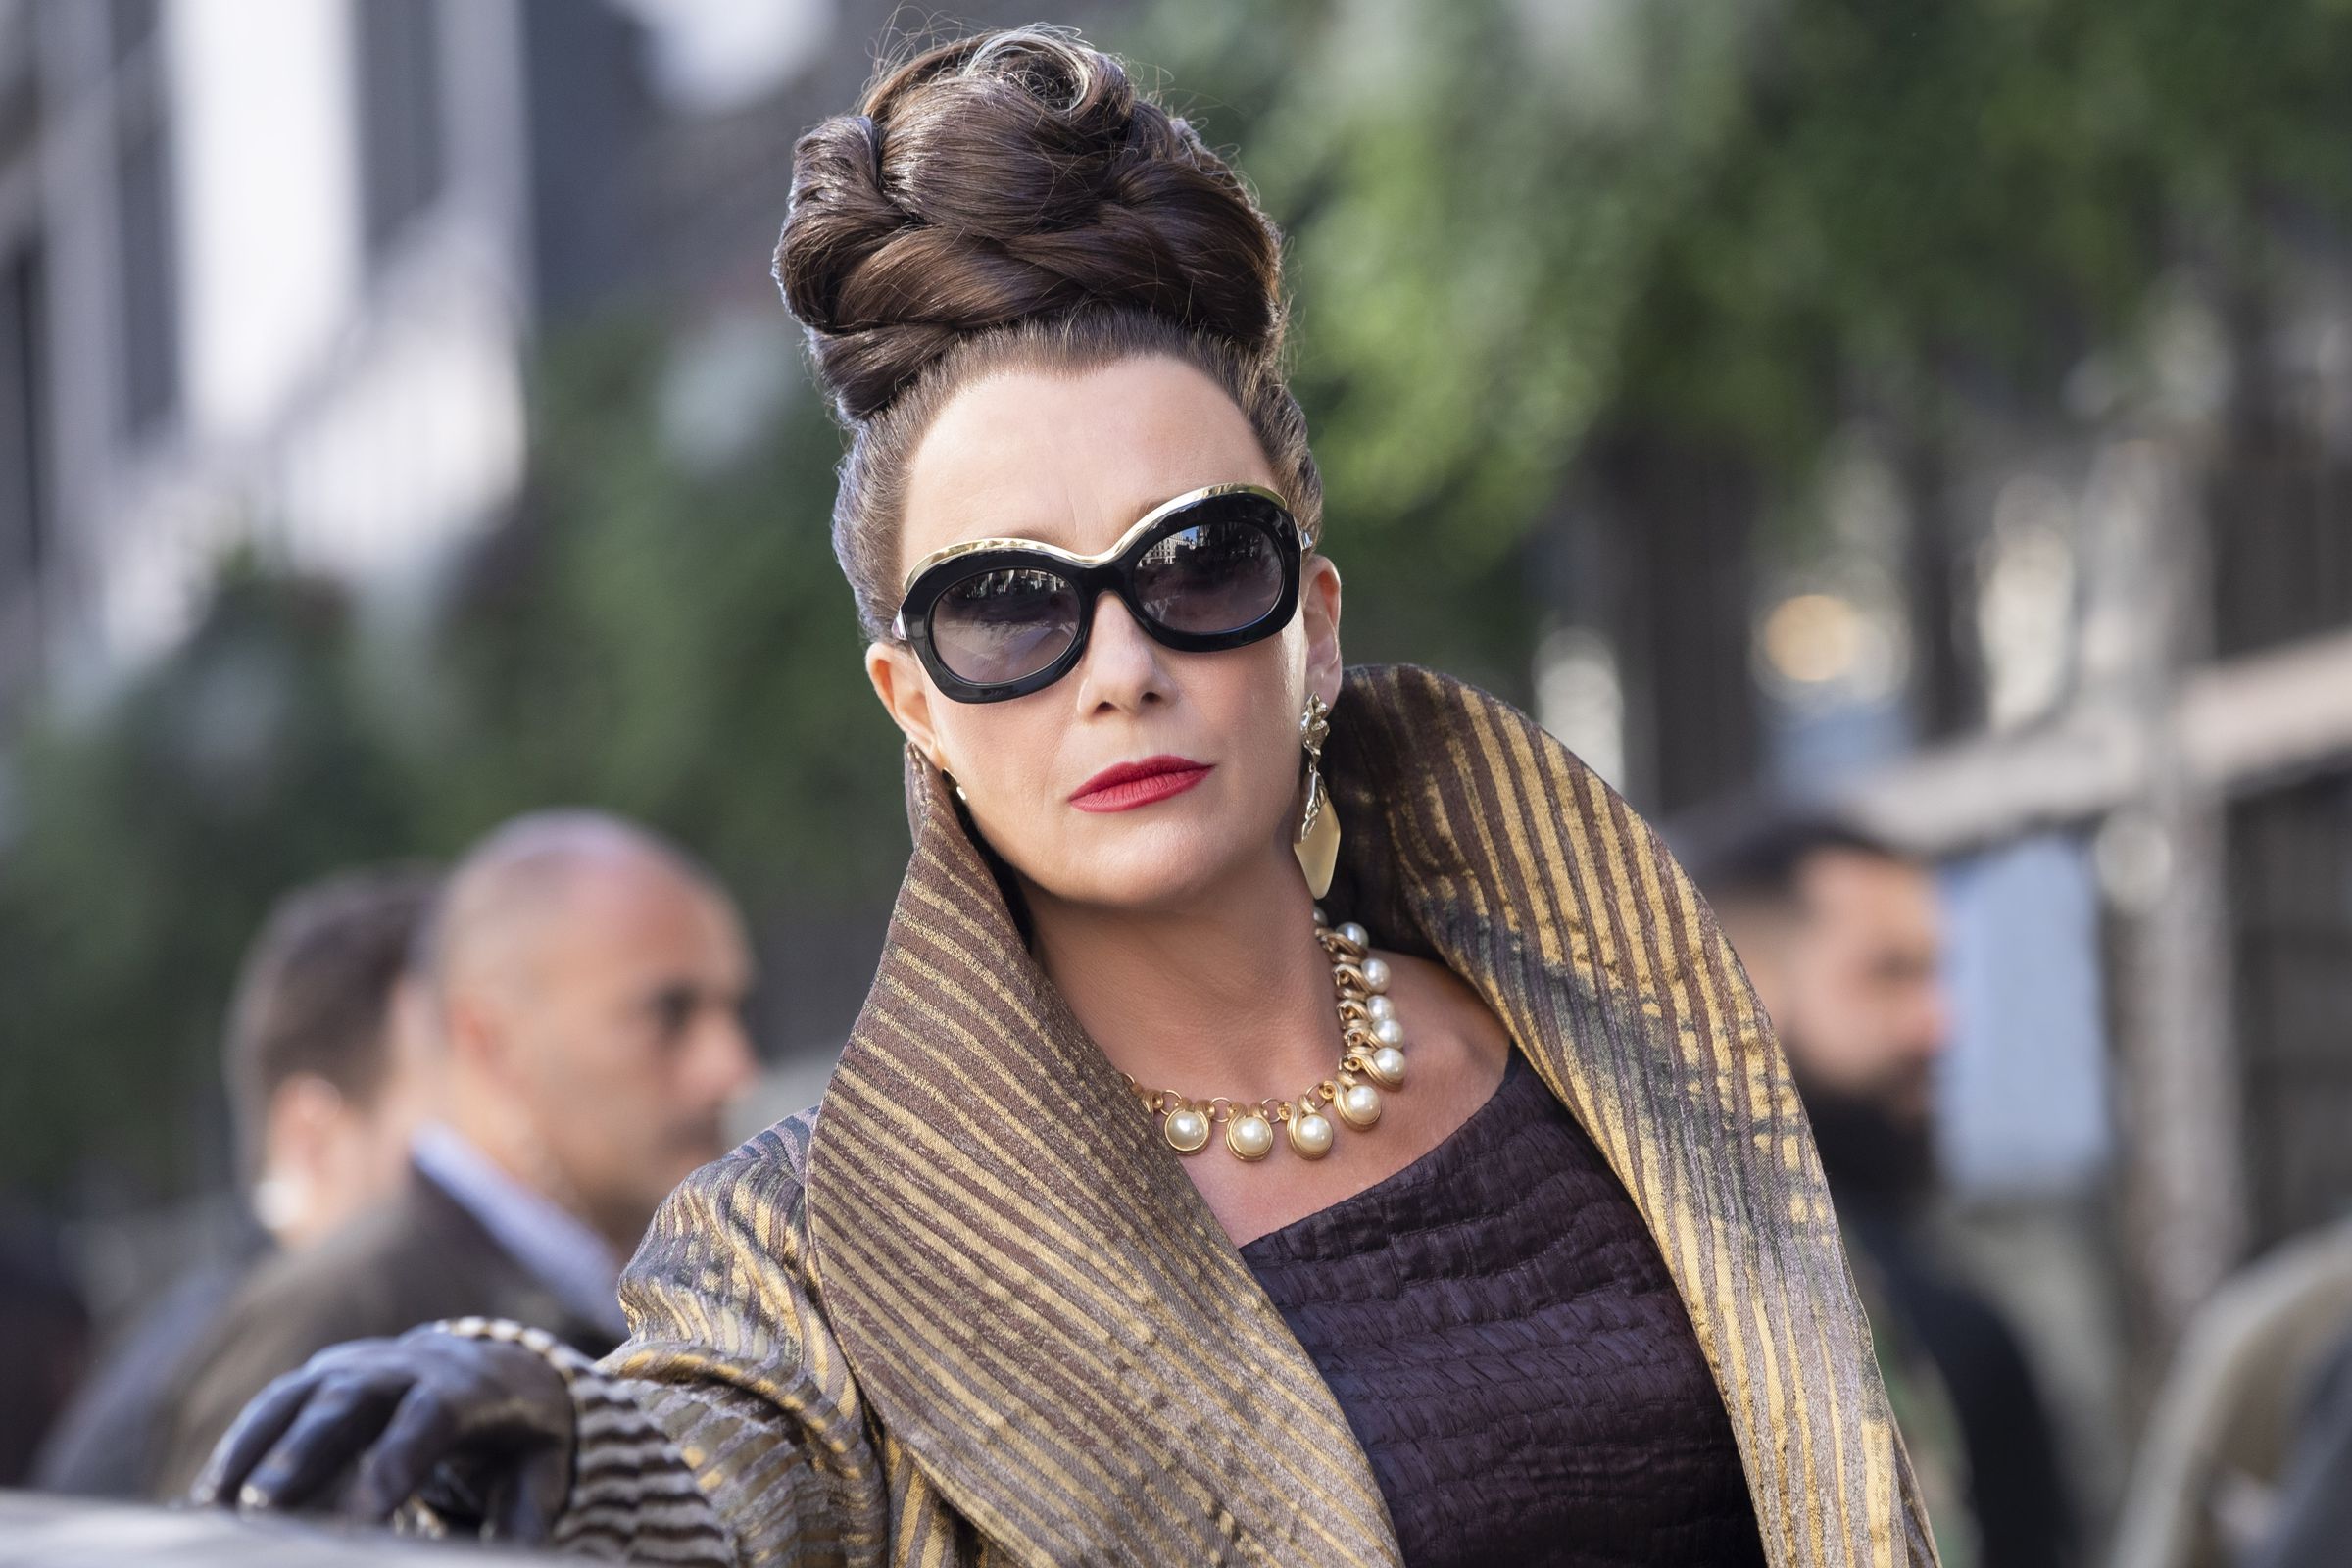 Emma Thompson as the Baroness. Her hair is up in an intricate hairstyle, she is wearing large sunglasses, gold earrings, a pearl necklace and a large gold coat.